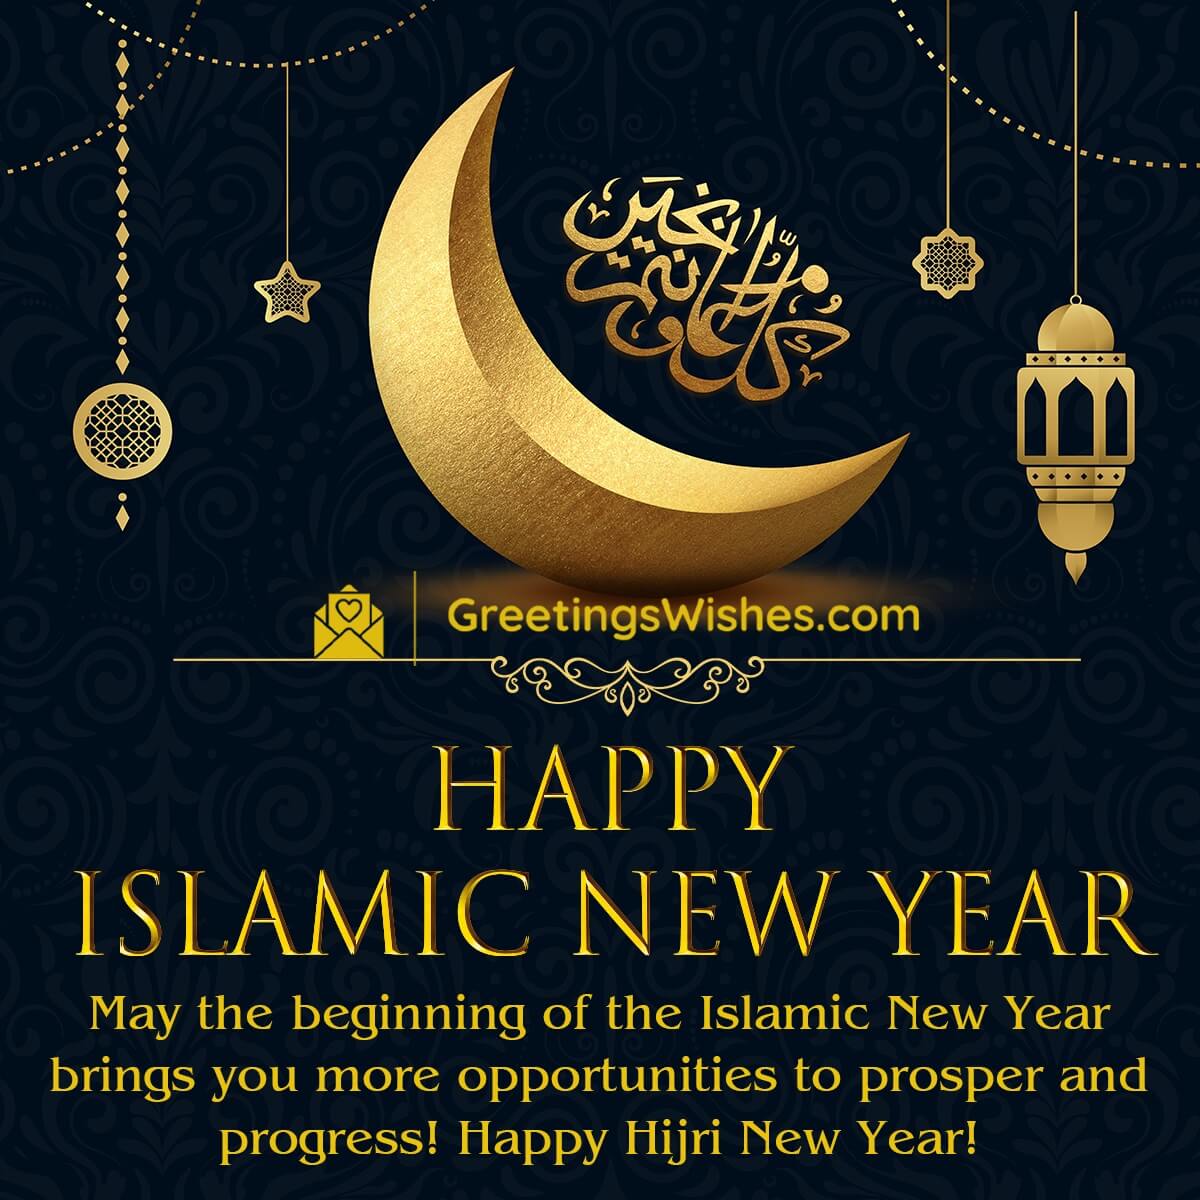 Islamic New Year Wishes - Greetings Wishes